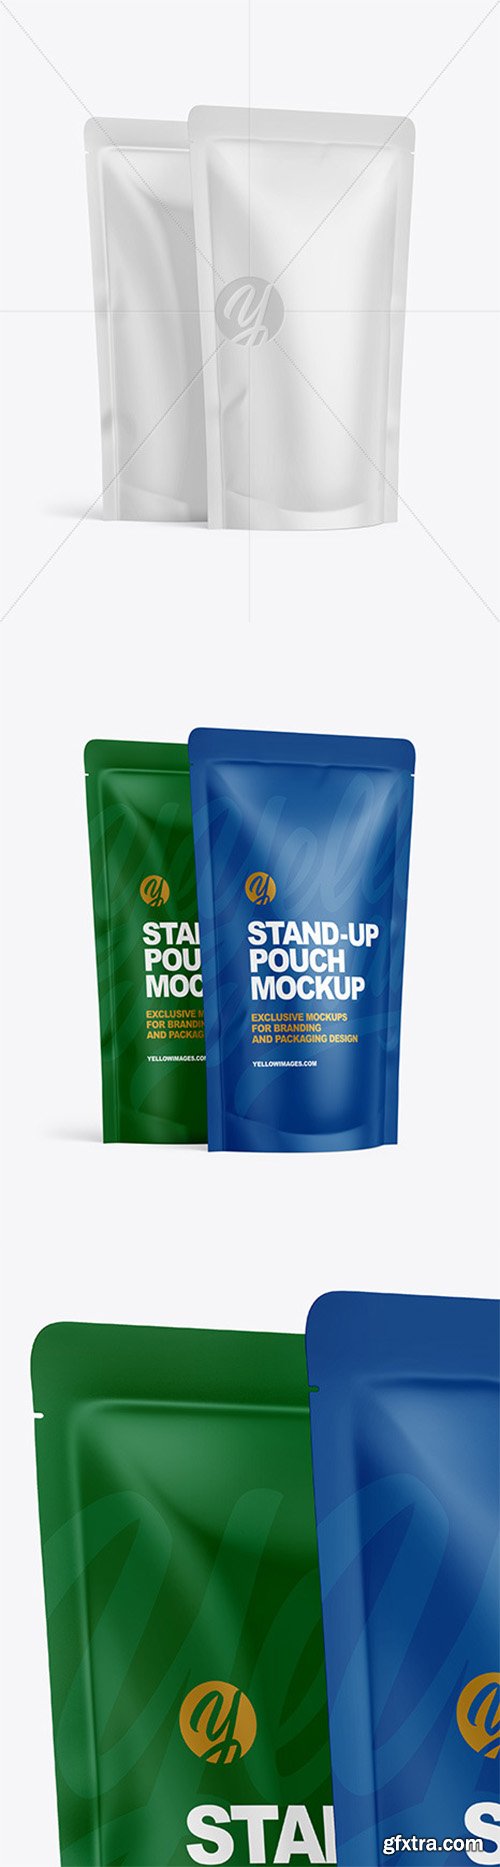 Two Matte Stand-up Pouches Mockup 64299